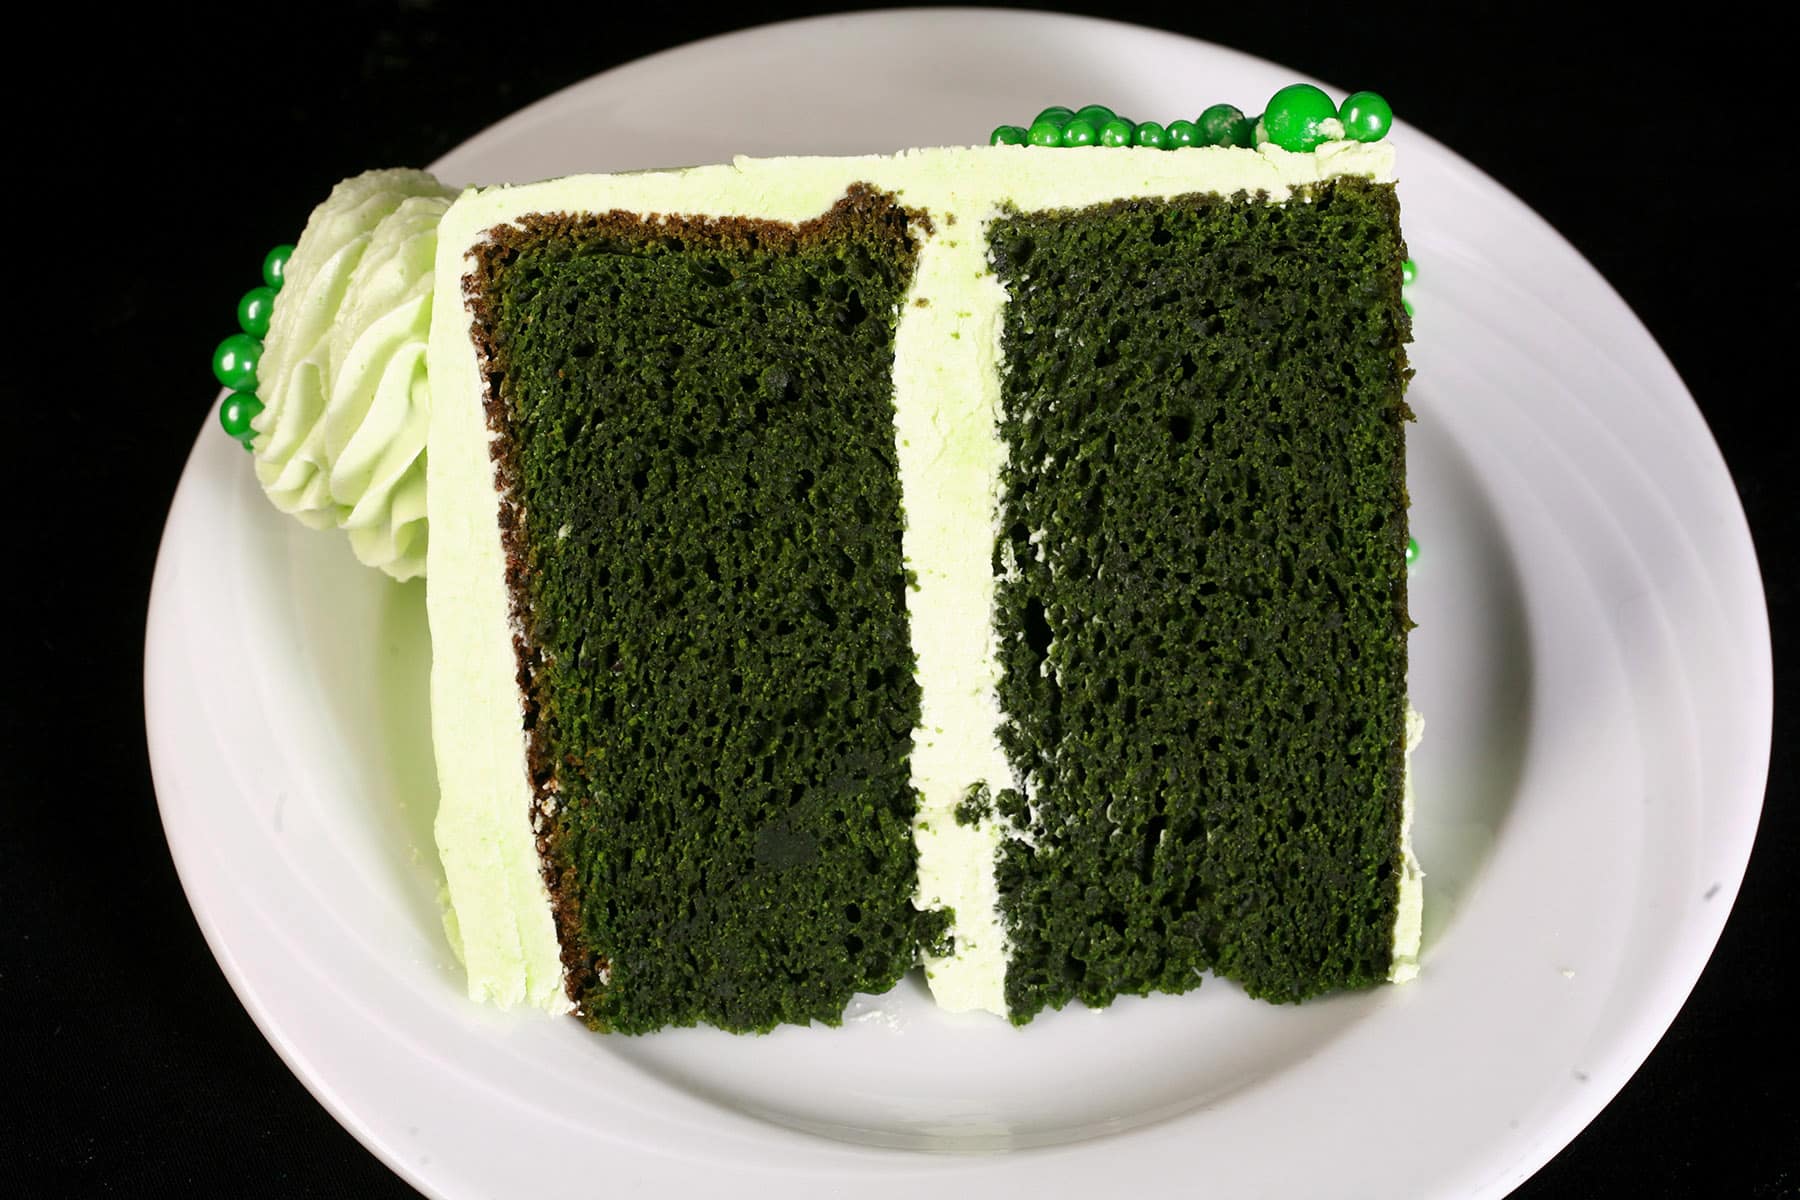 A slice of green velvet cake with light green frosting on a white plate.